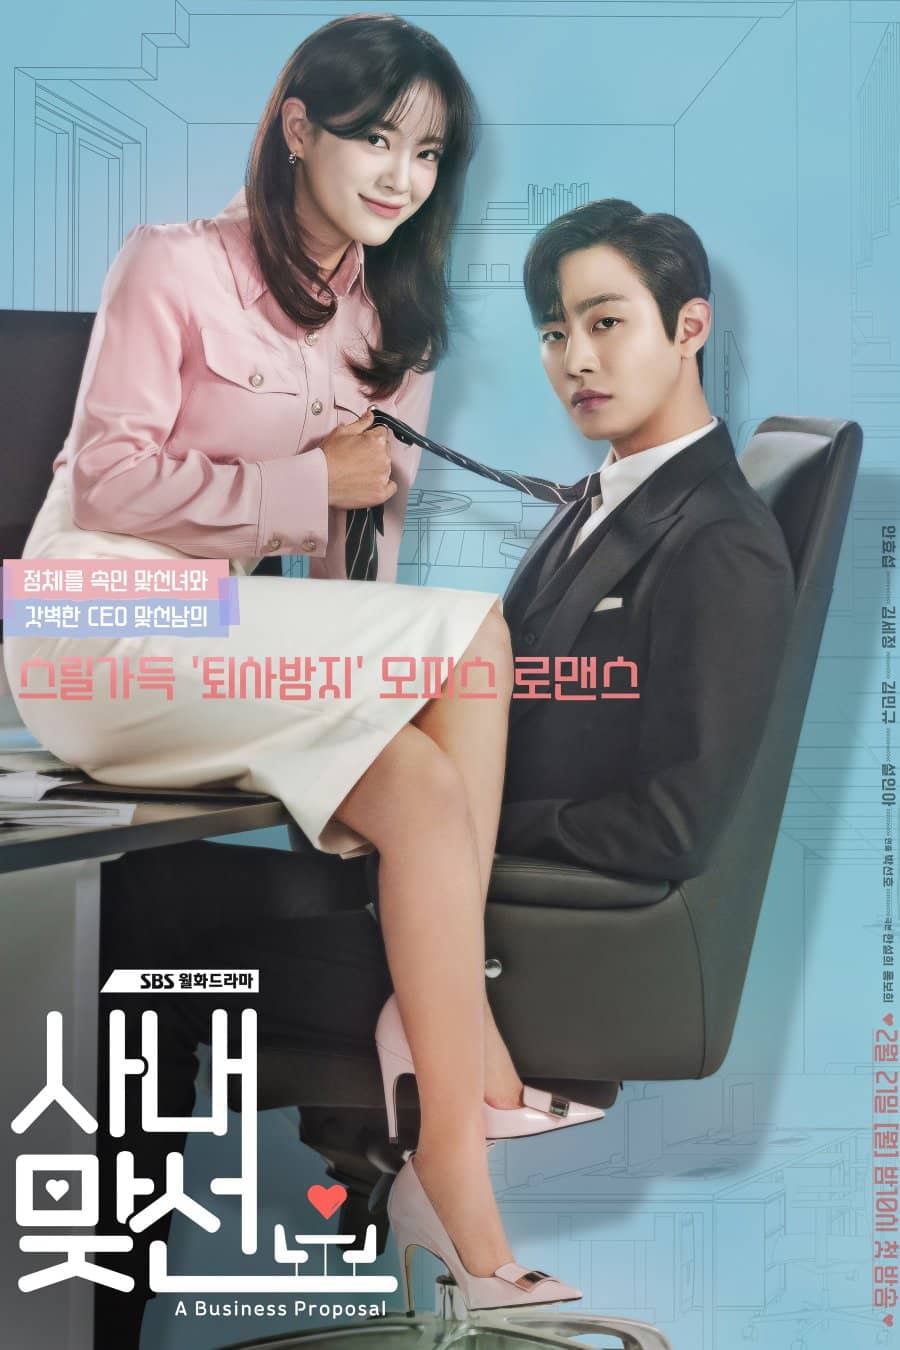 A Business Proposal - Sinopsis, Pemain, OST, Episode, Review